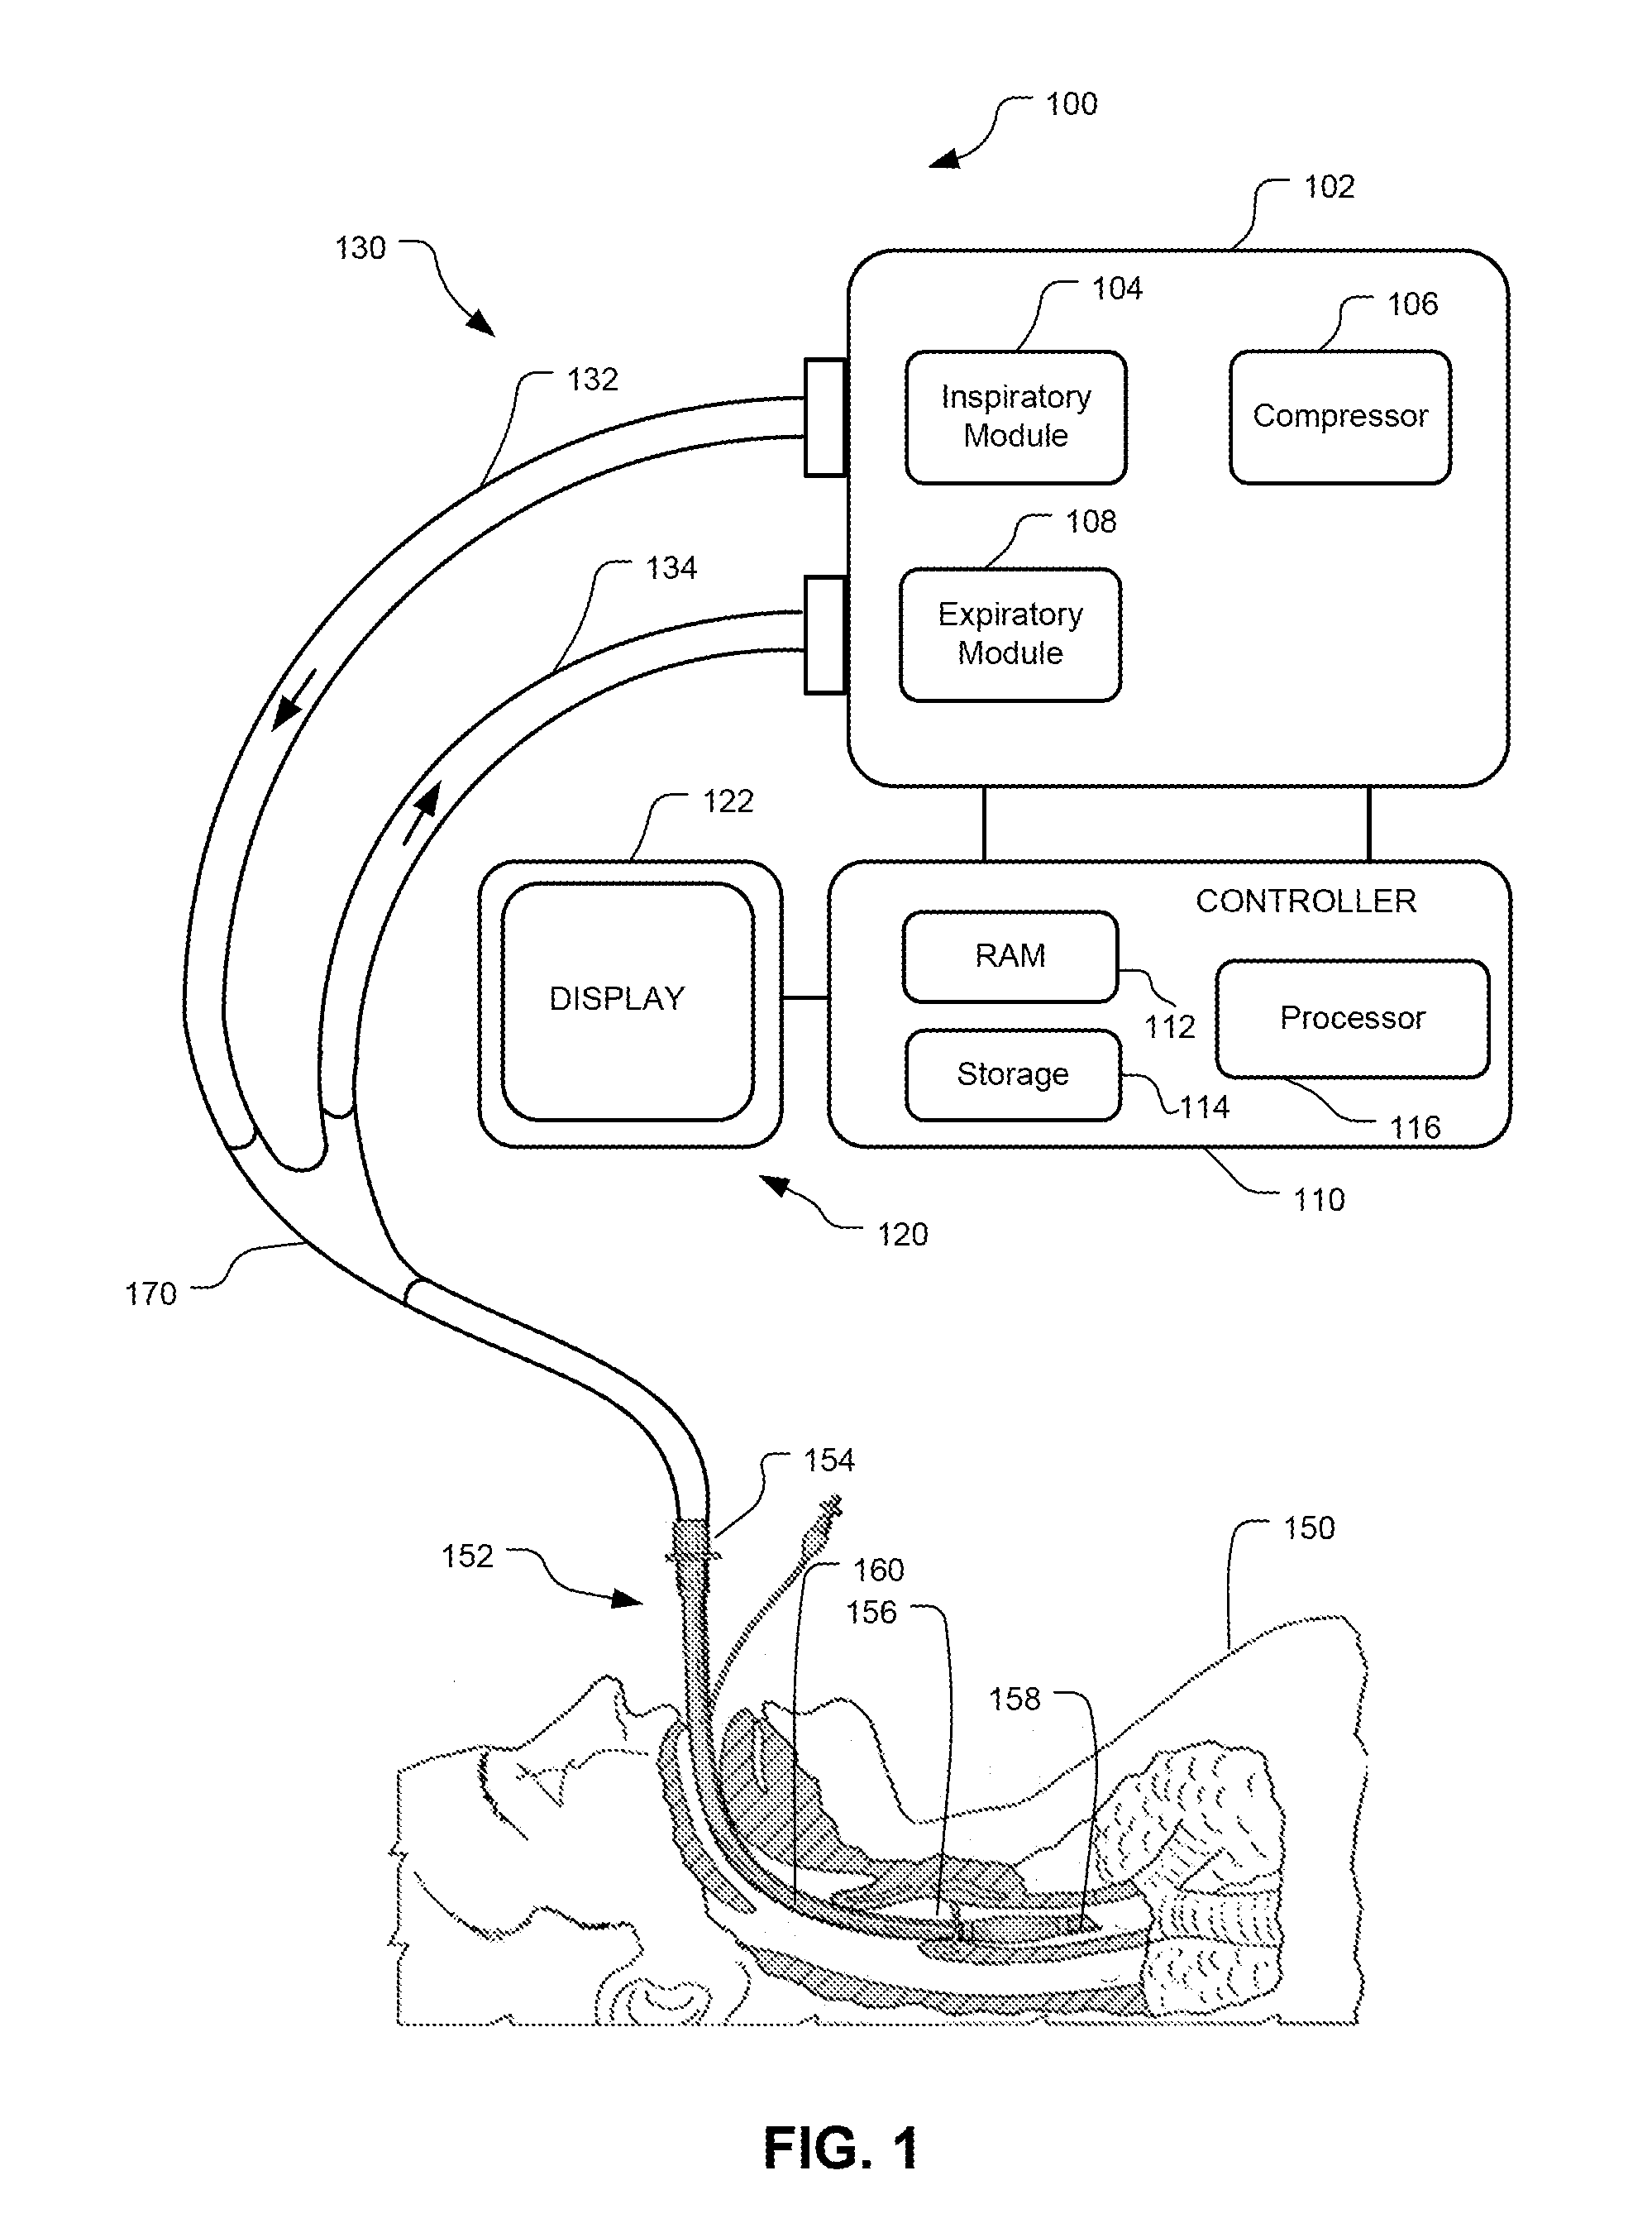 Method And System For Generating A Pressure Volume Loop Of A Low Flow Recruitment Maneuver